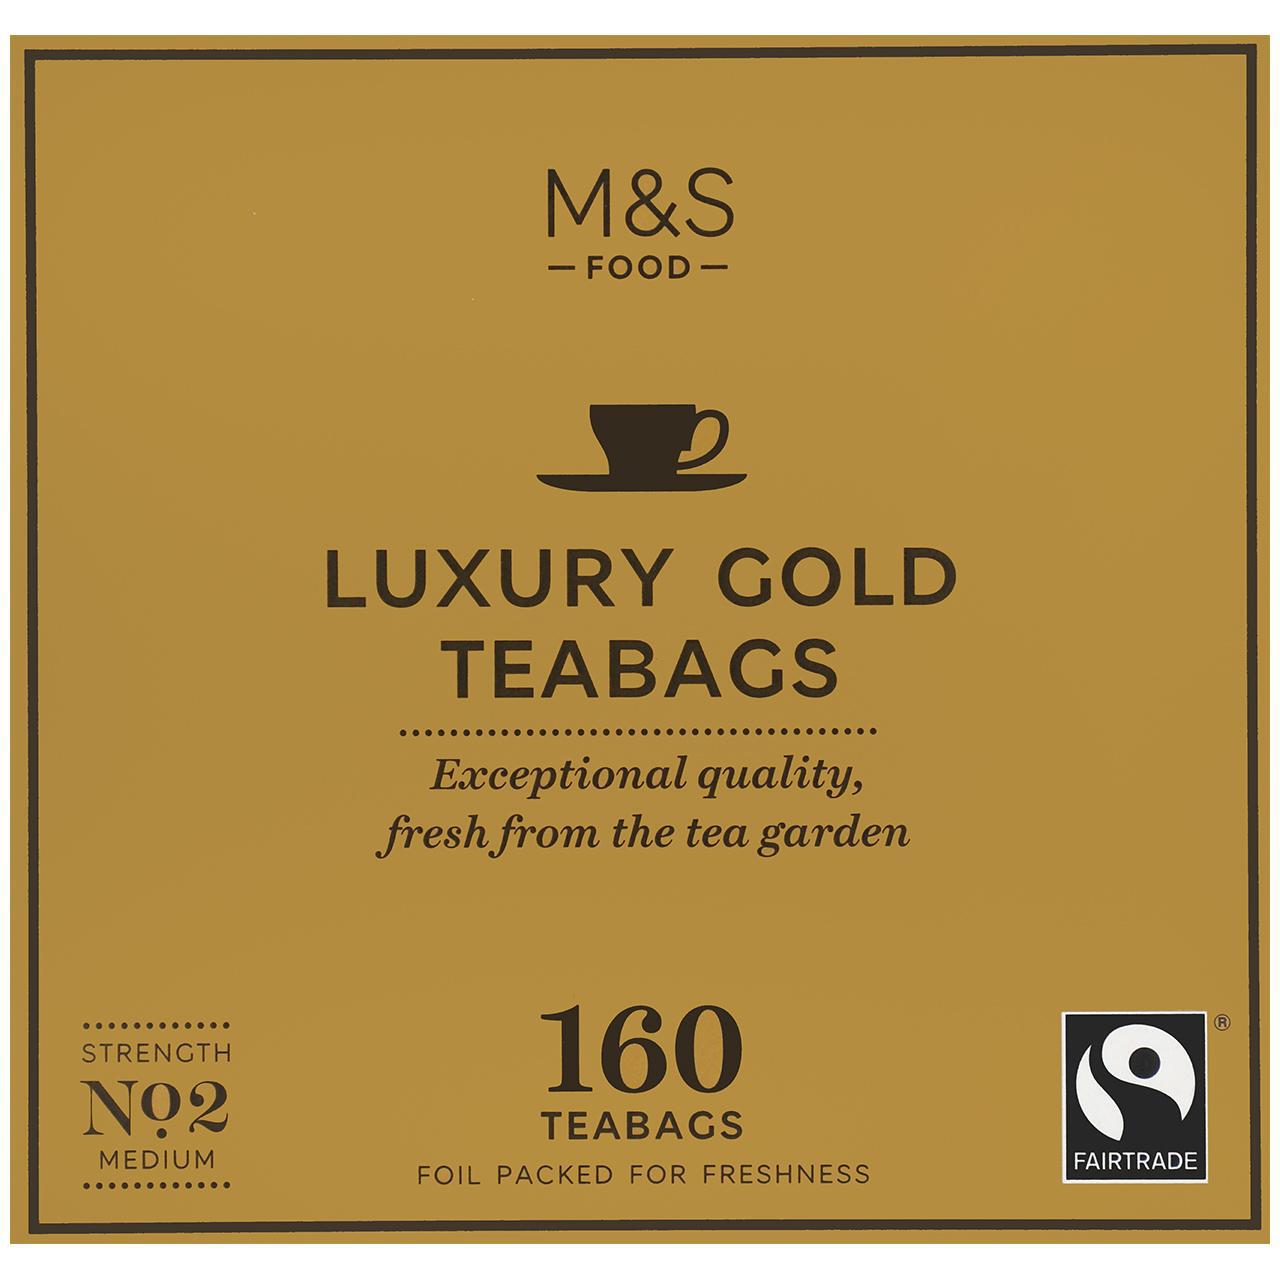 M&S Fairtrade Luxury Gold Teabags 160 per pack